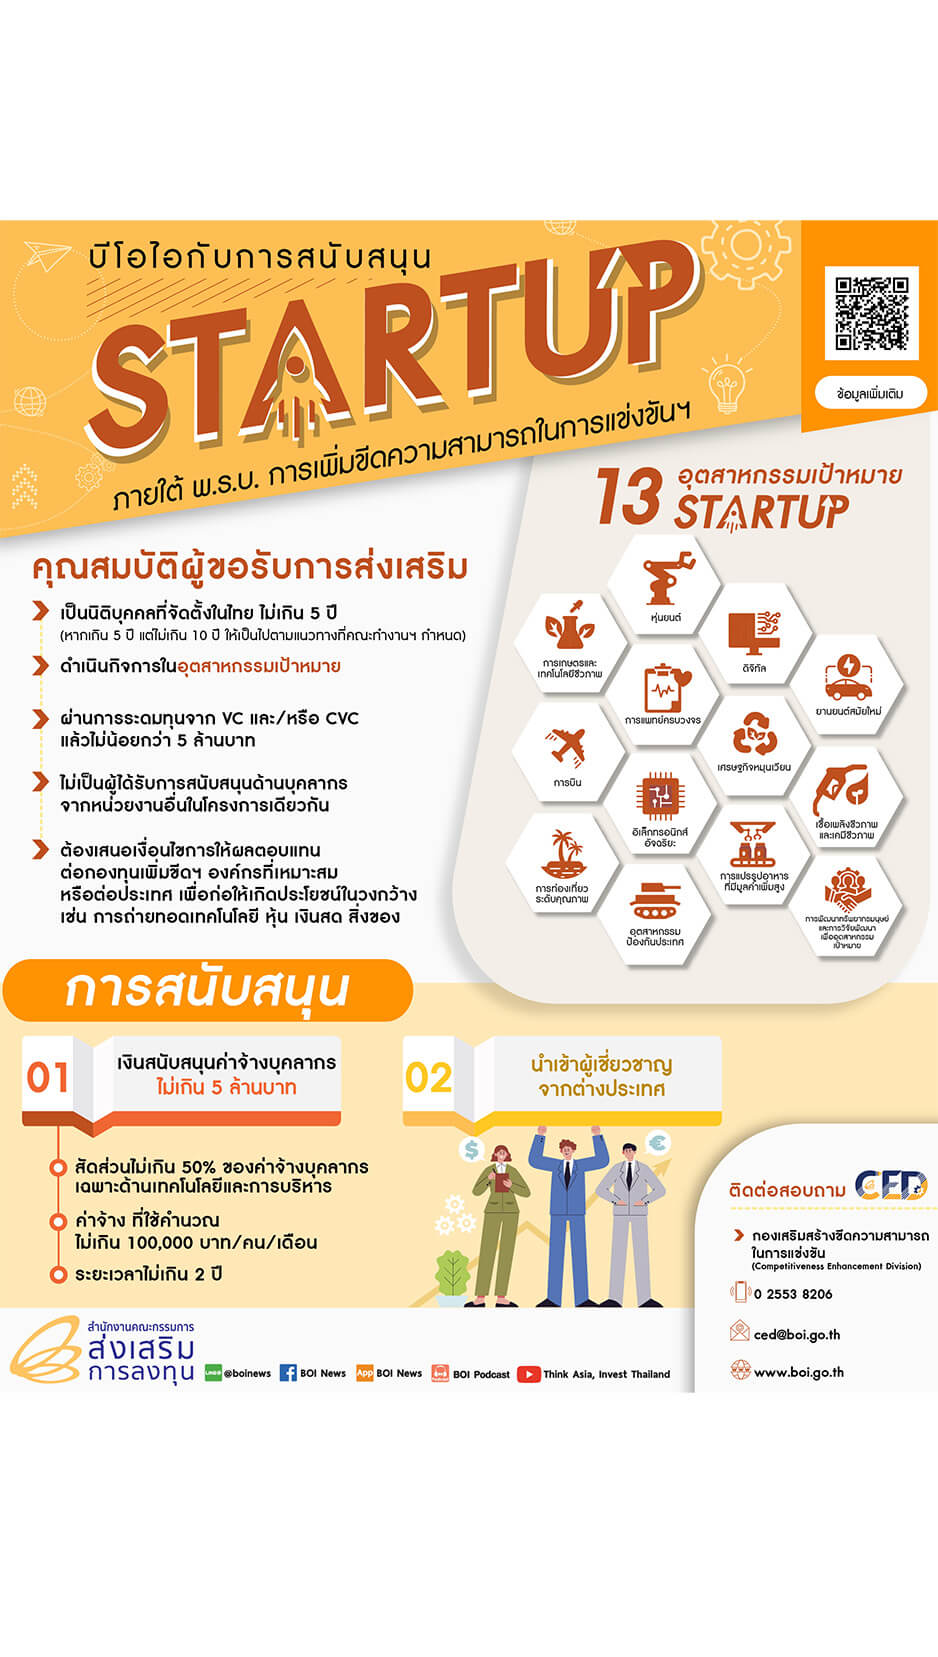 START UP NEW TARGETED INDUSTRIES